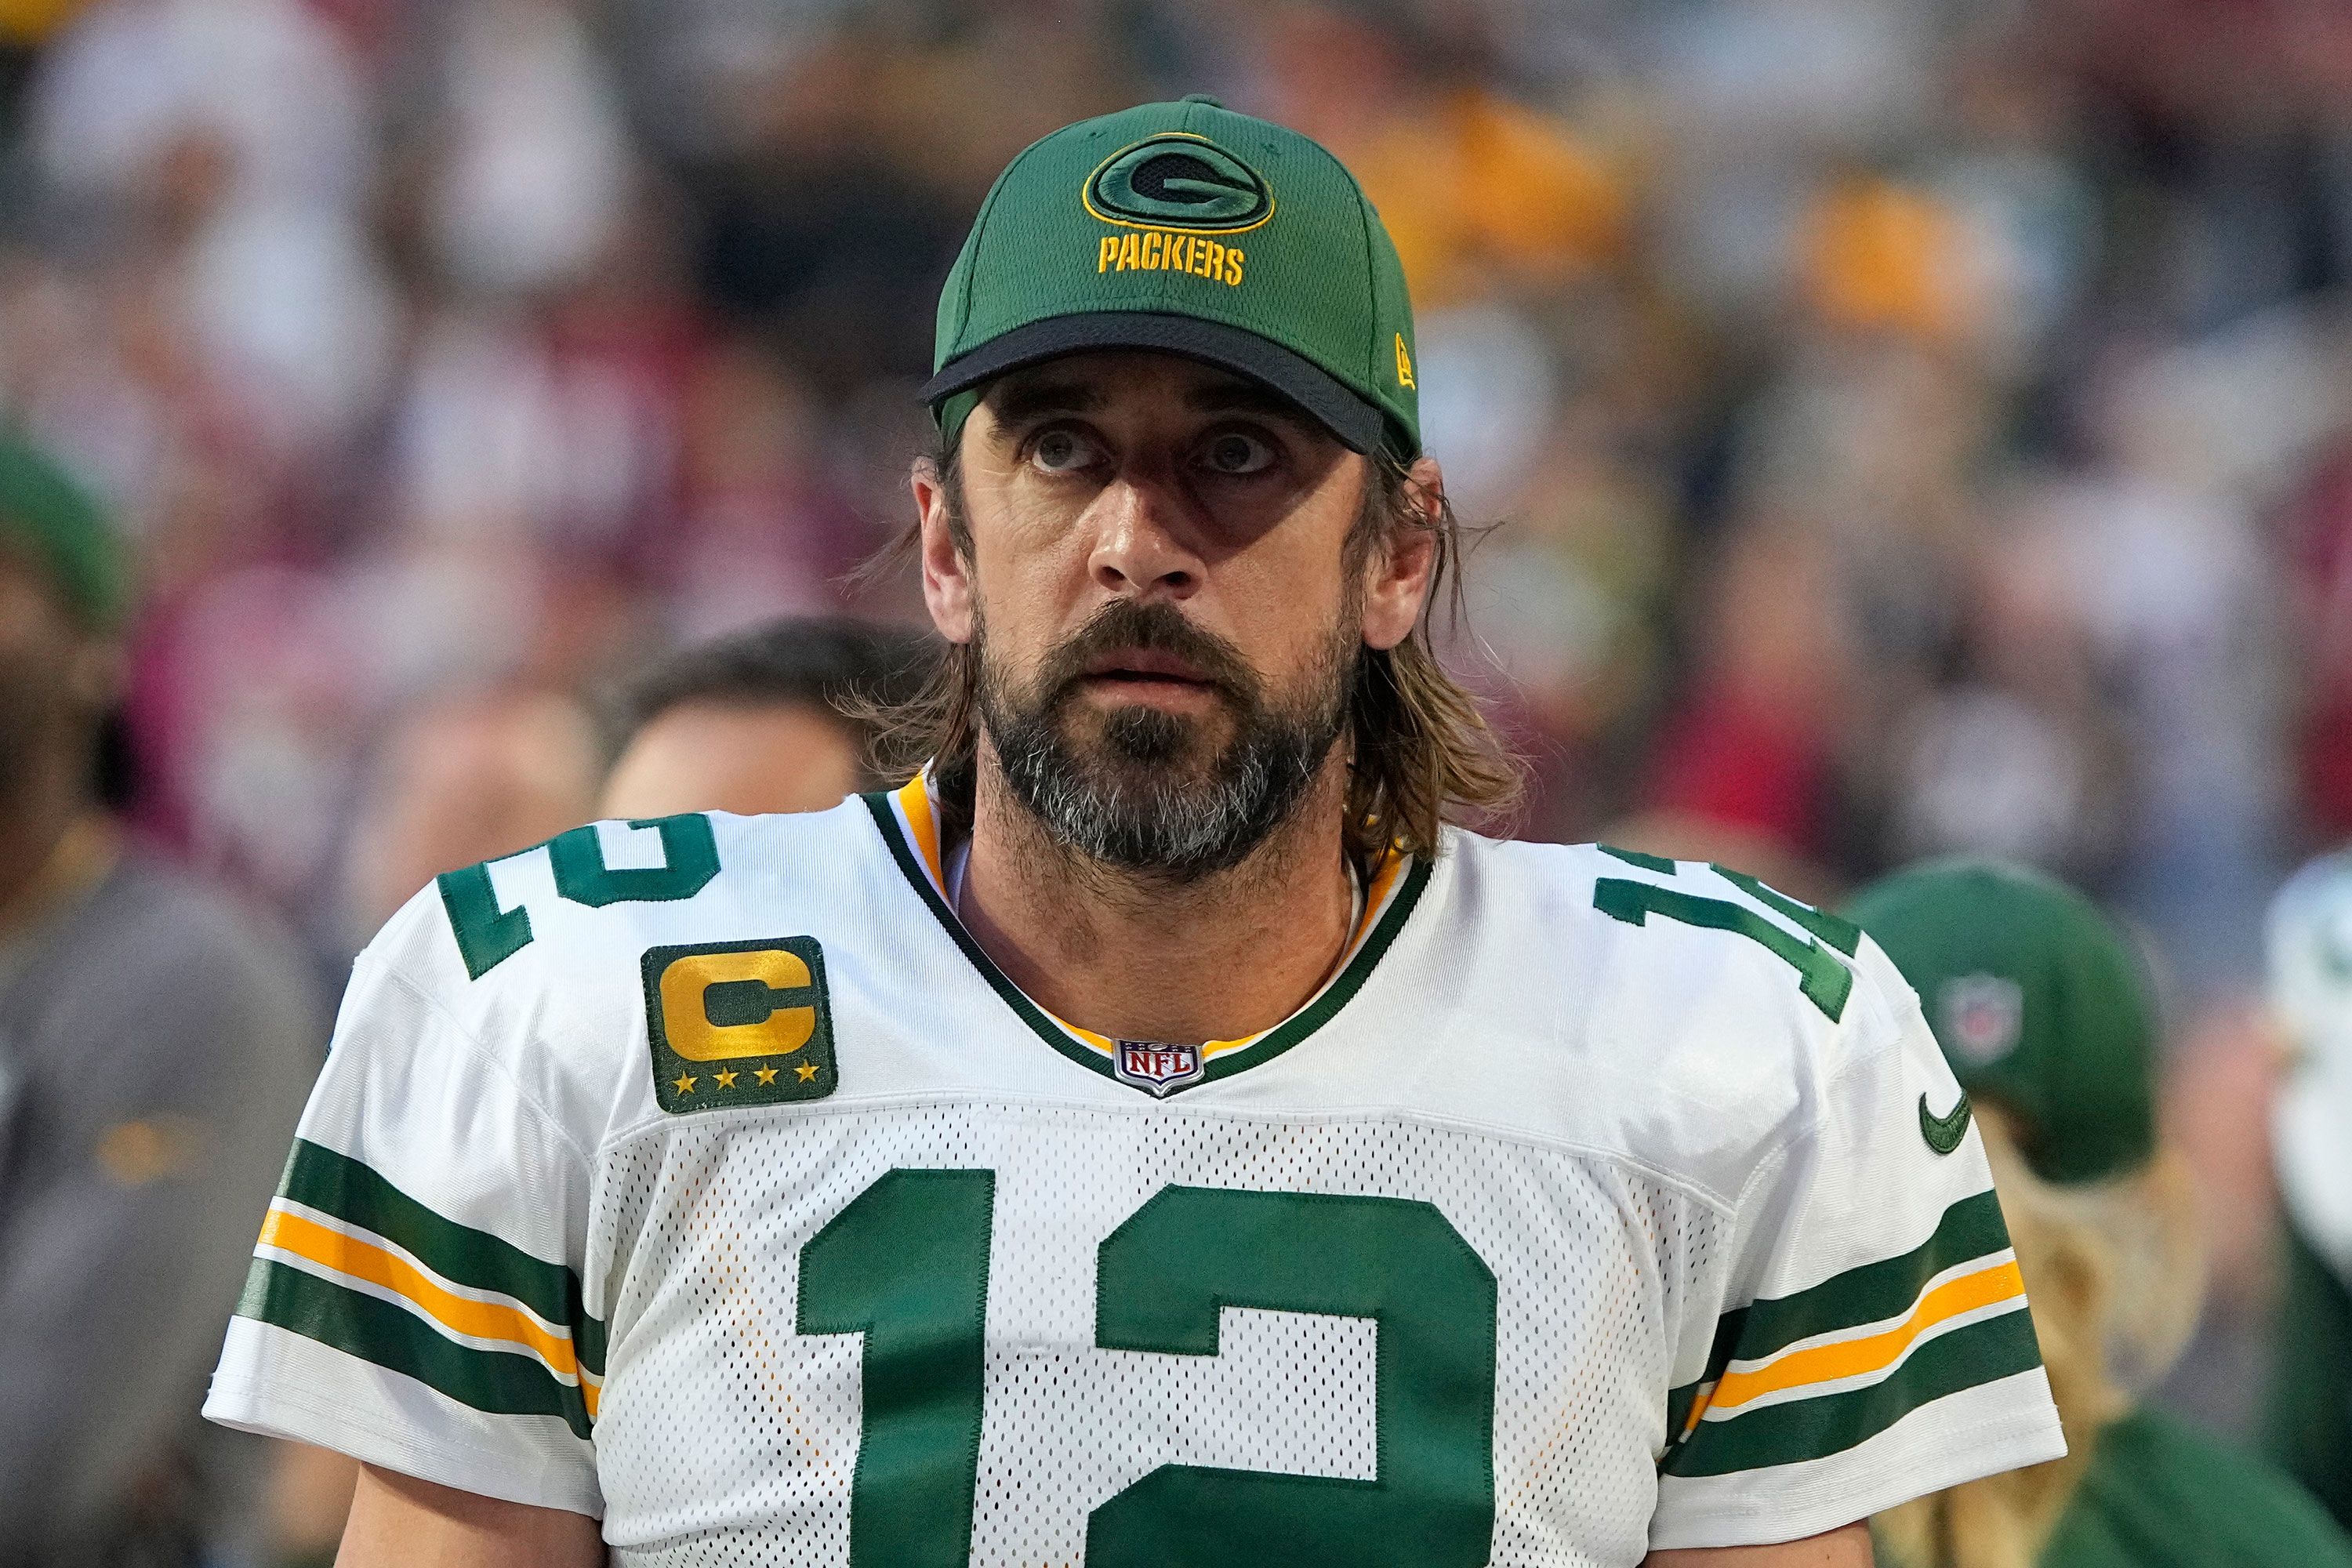 Green Bay Packers star quarterback Aaron Rodgers expected to play